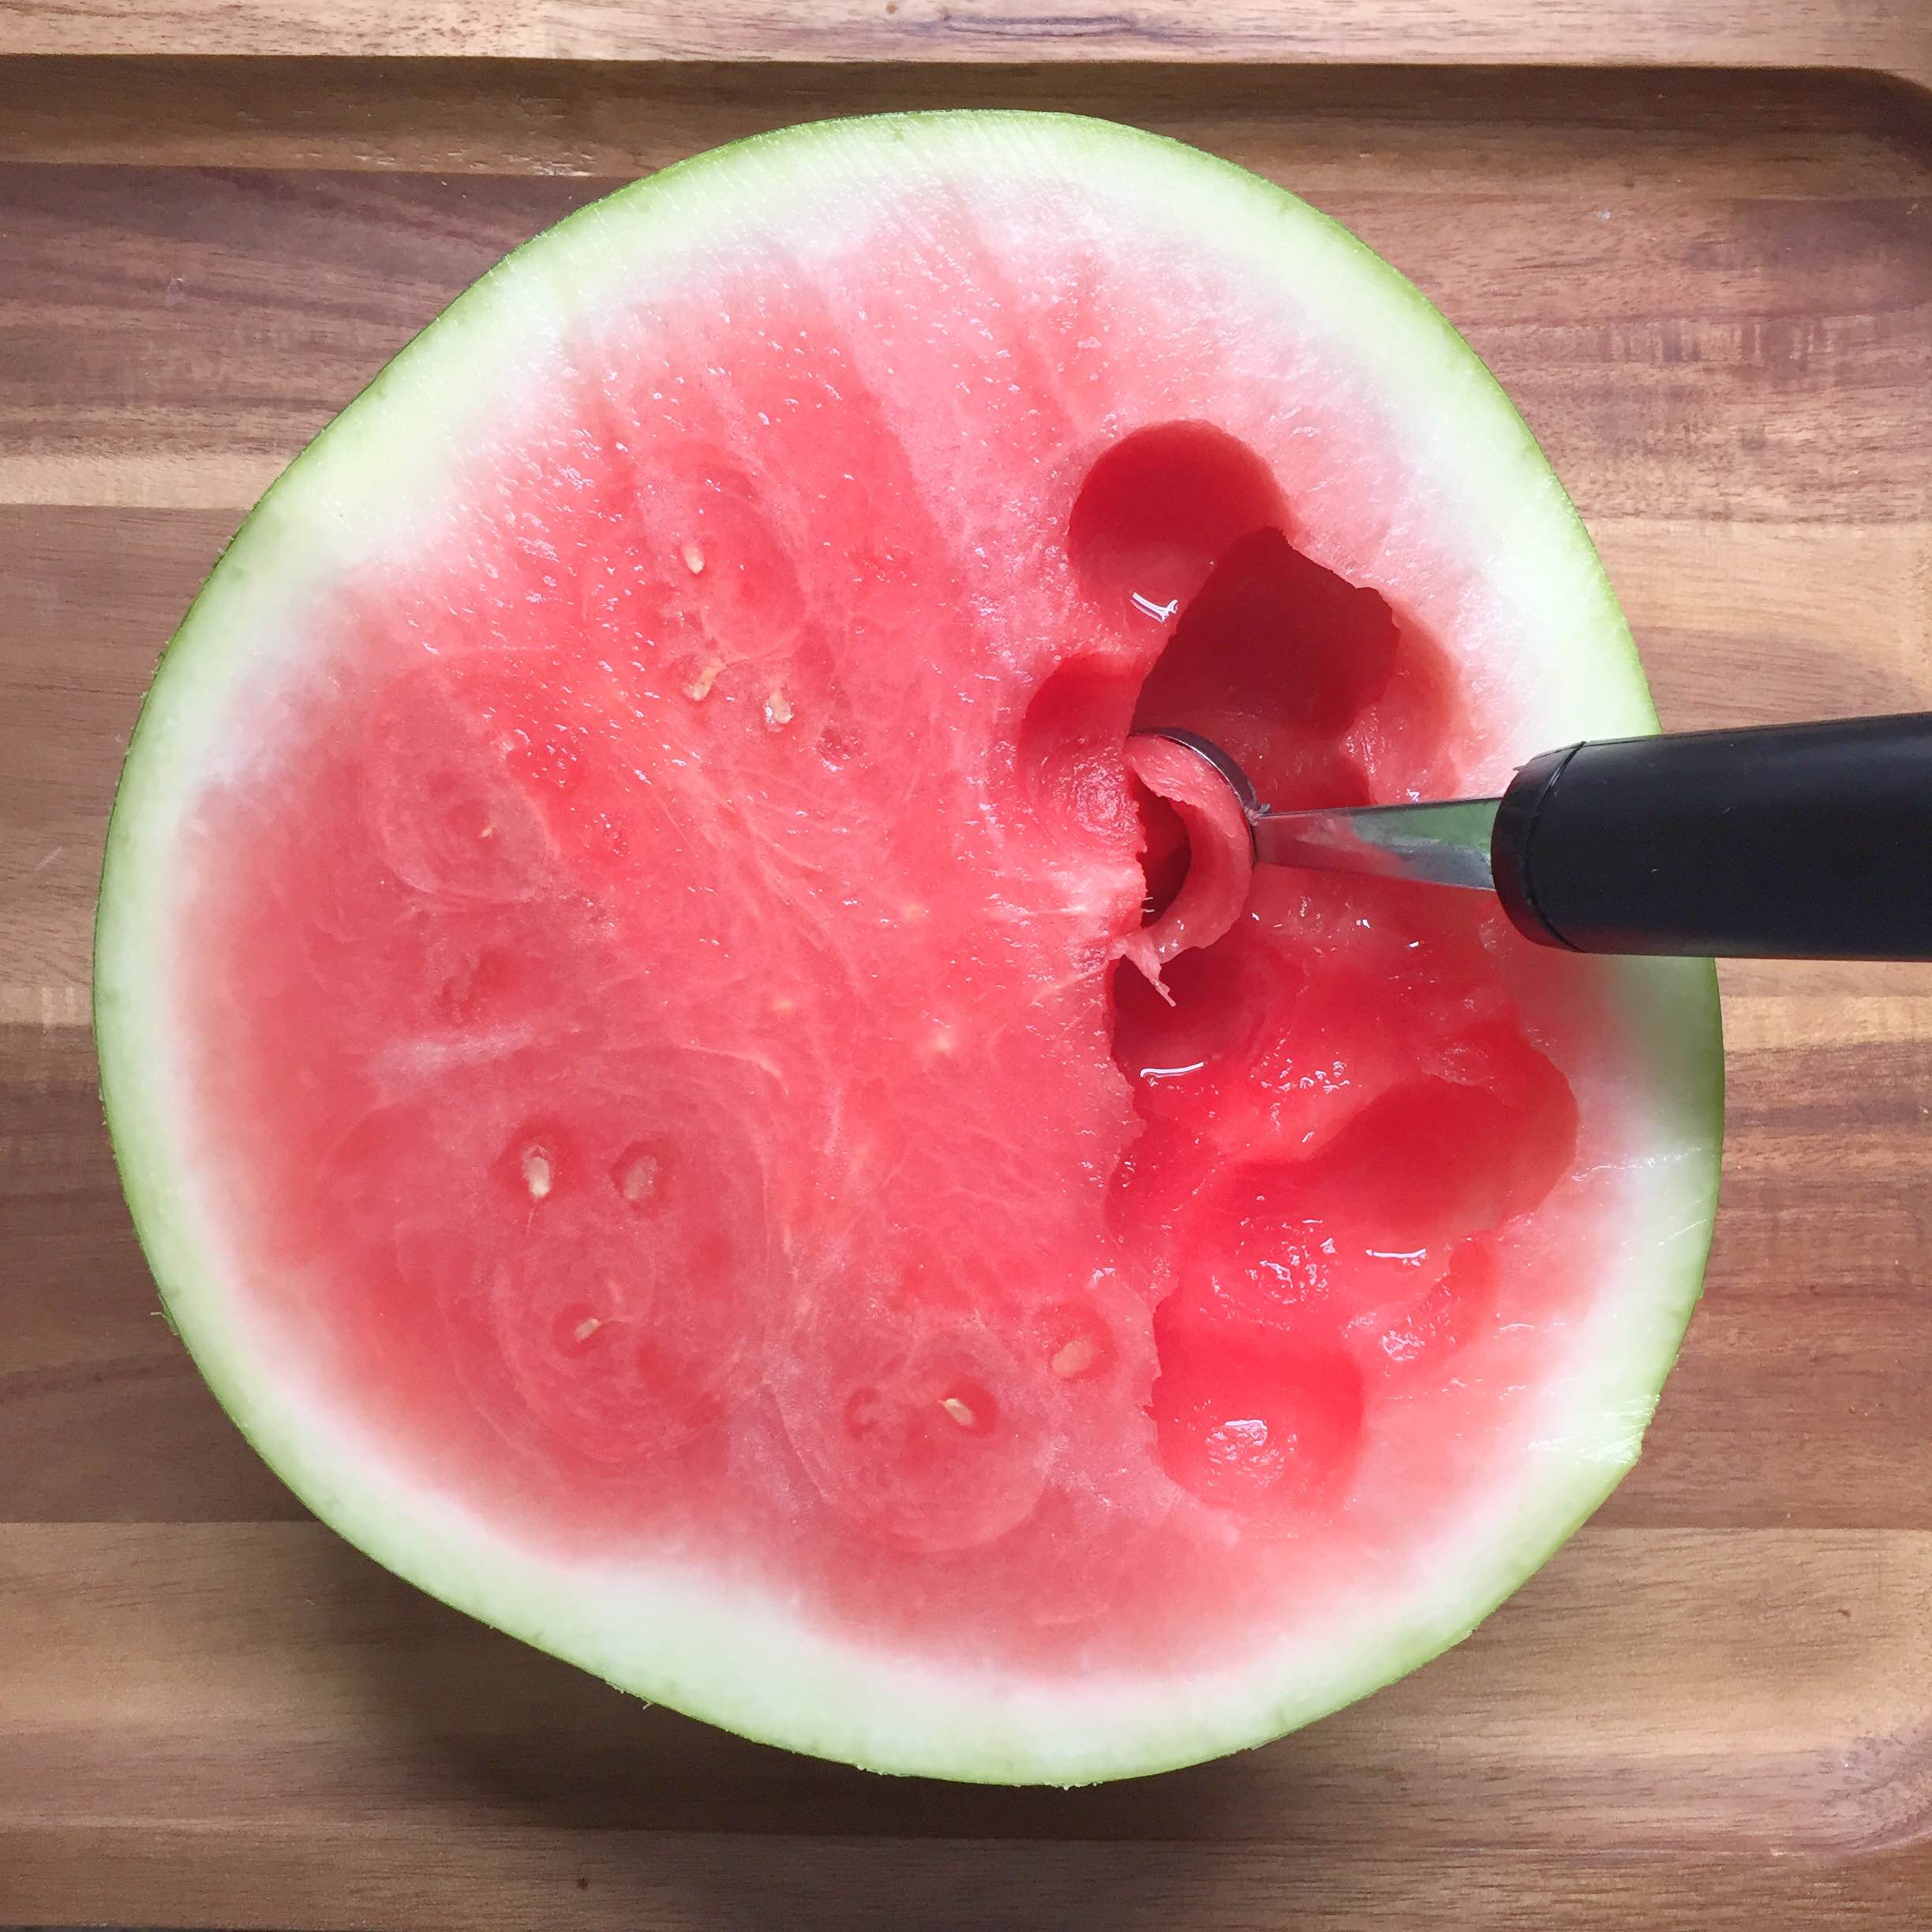 How to make a watermelon fruit bowl | 4th of July party fruit | 4th of July snack idea | How to make watermelon fruit salad GinaKirk.com @ginaekirk